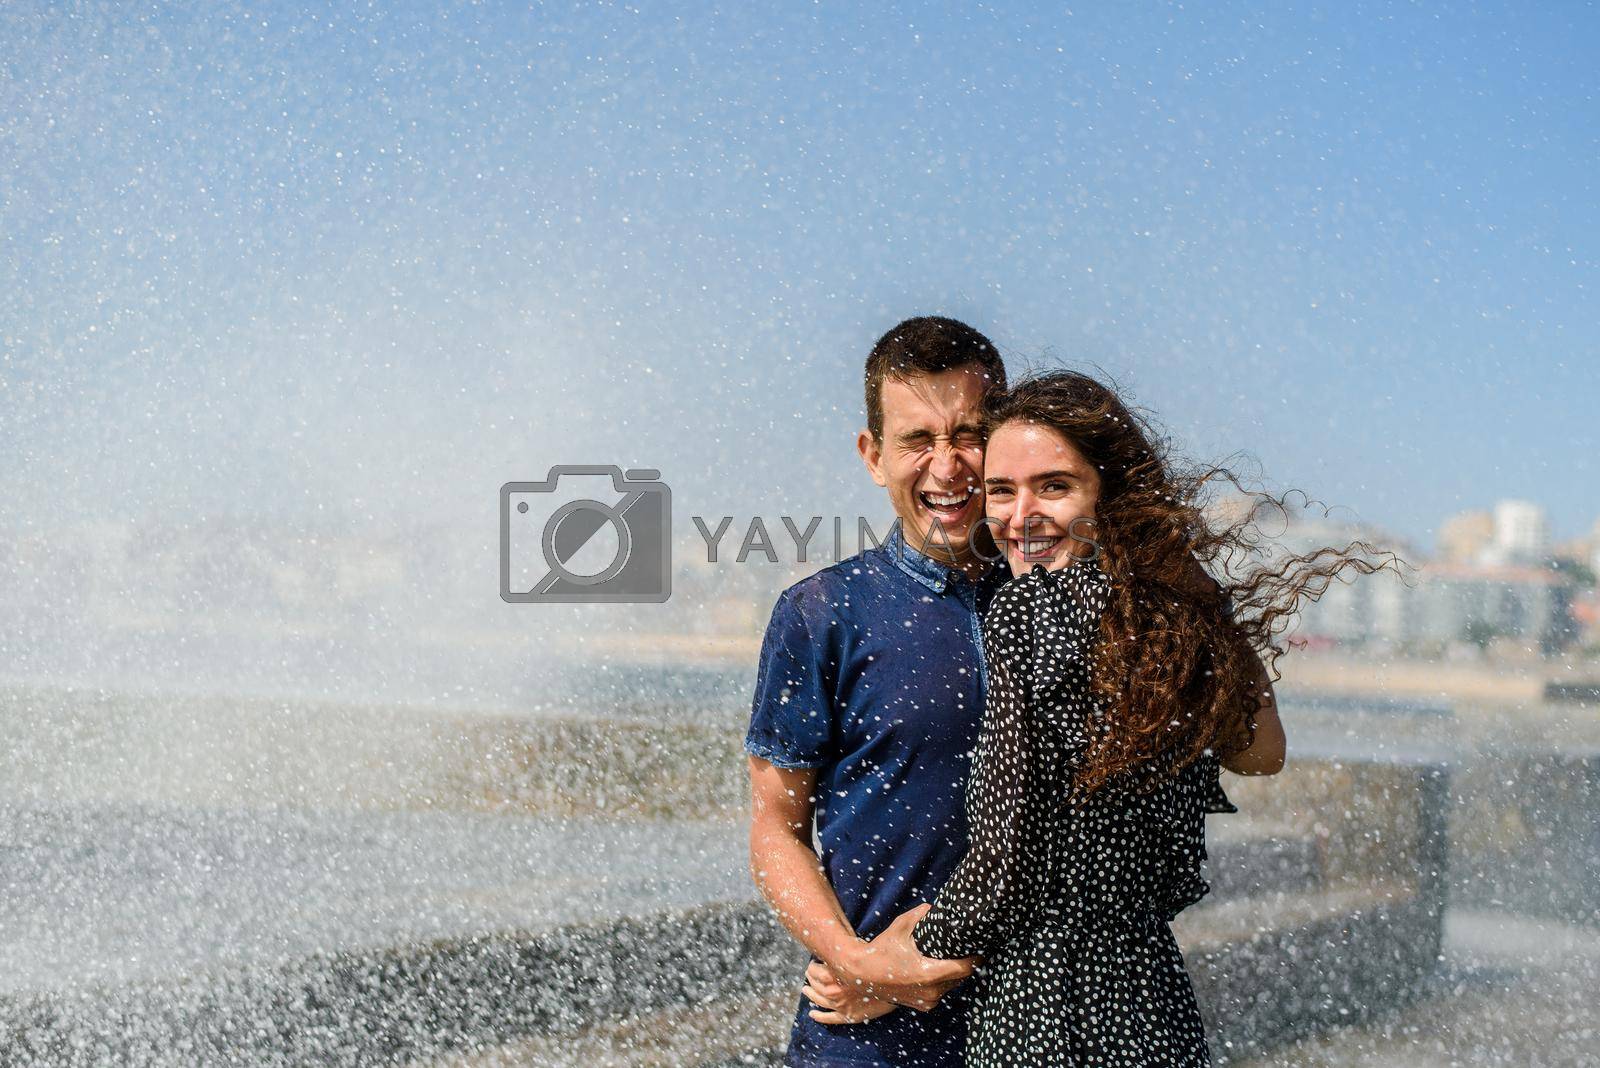 Splashing a wave of the ocean on two people in love. Lifestyle of couple. Having fun and laughs. Porto, Portugal, near Atlantic ocean.